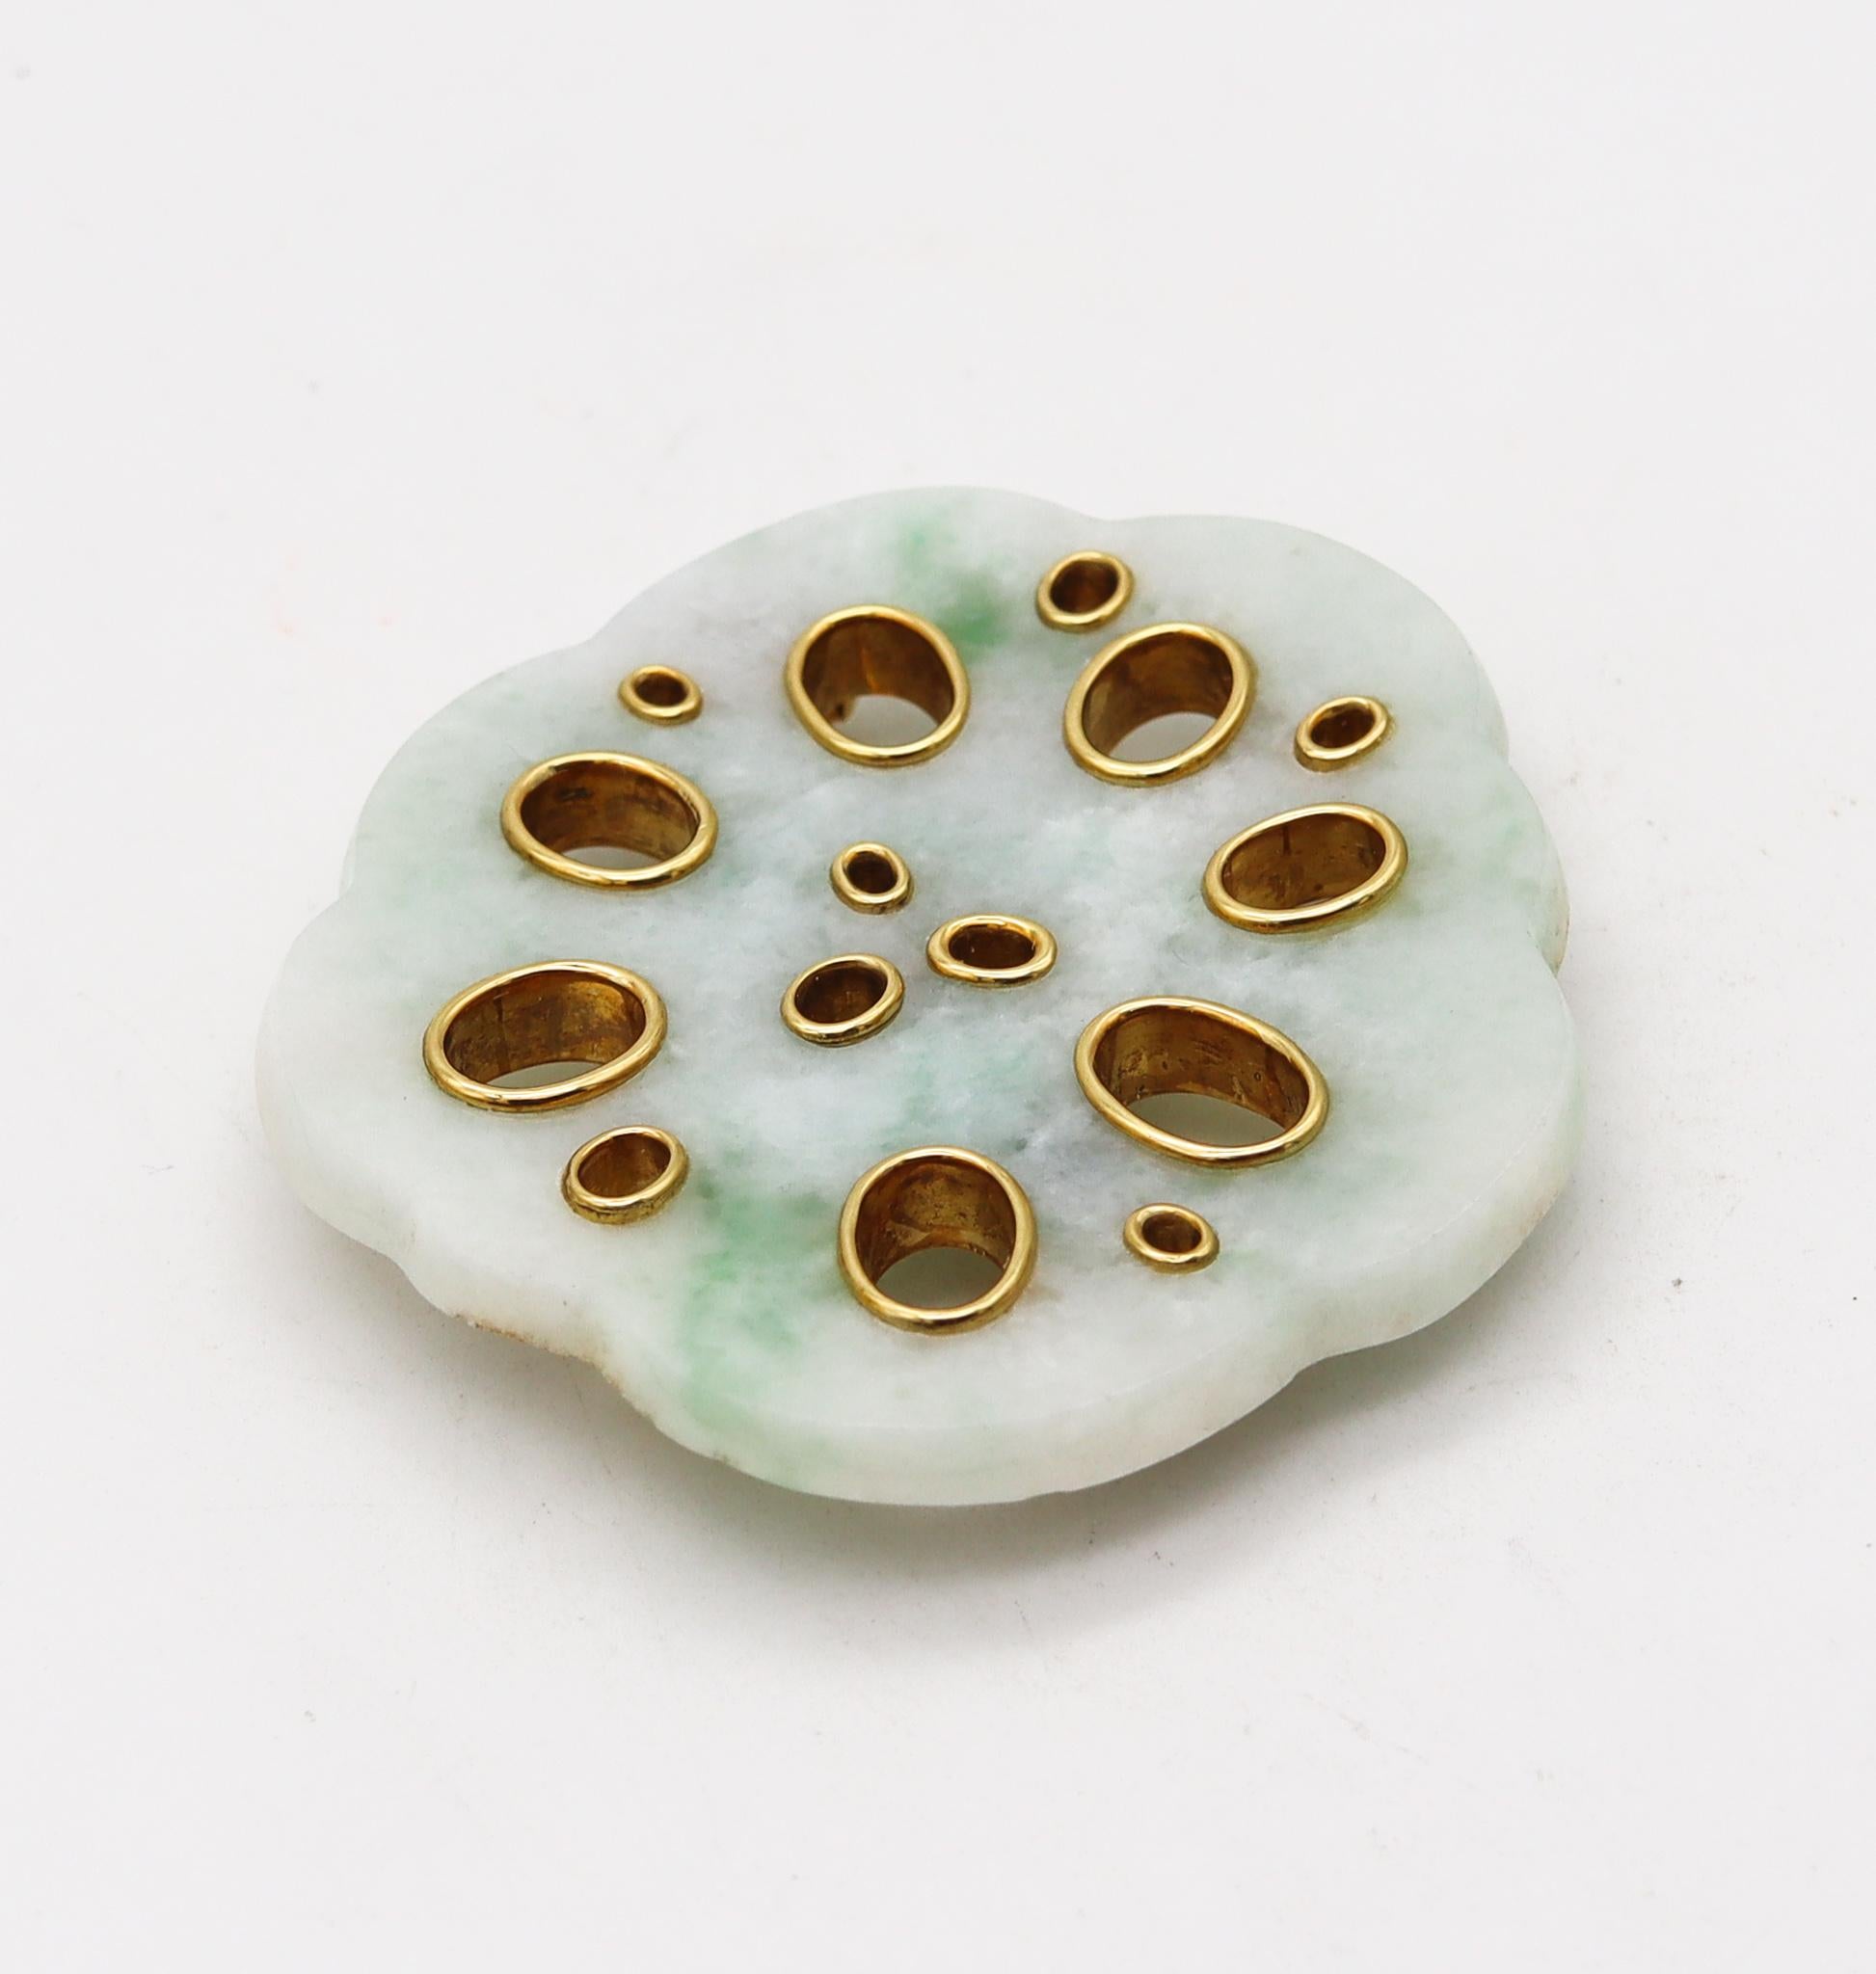 Mixed Cut Angela Cummings Studio 1983 Organic Lotus Pendant Brooch 18kt Gold with Nephrite For Sale